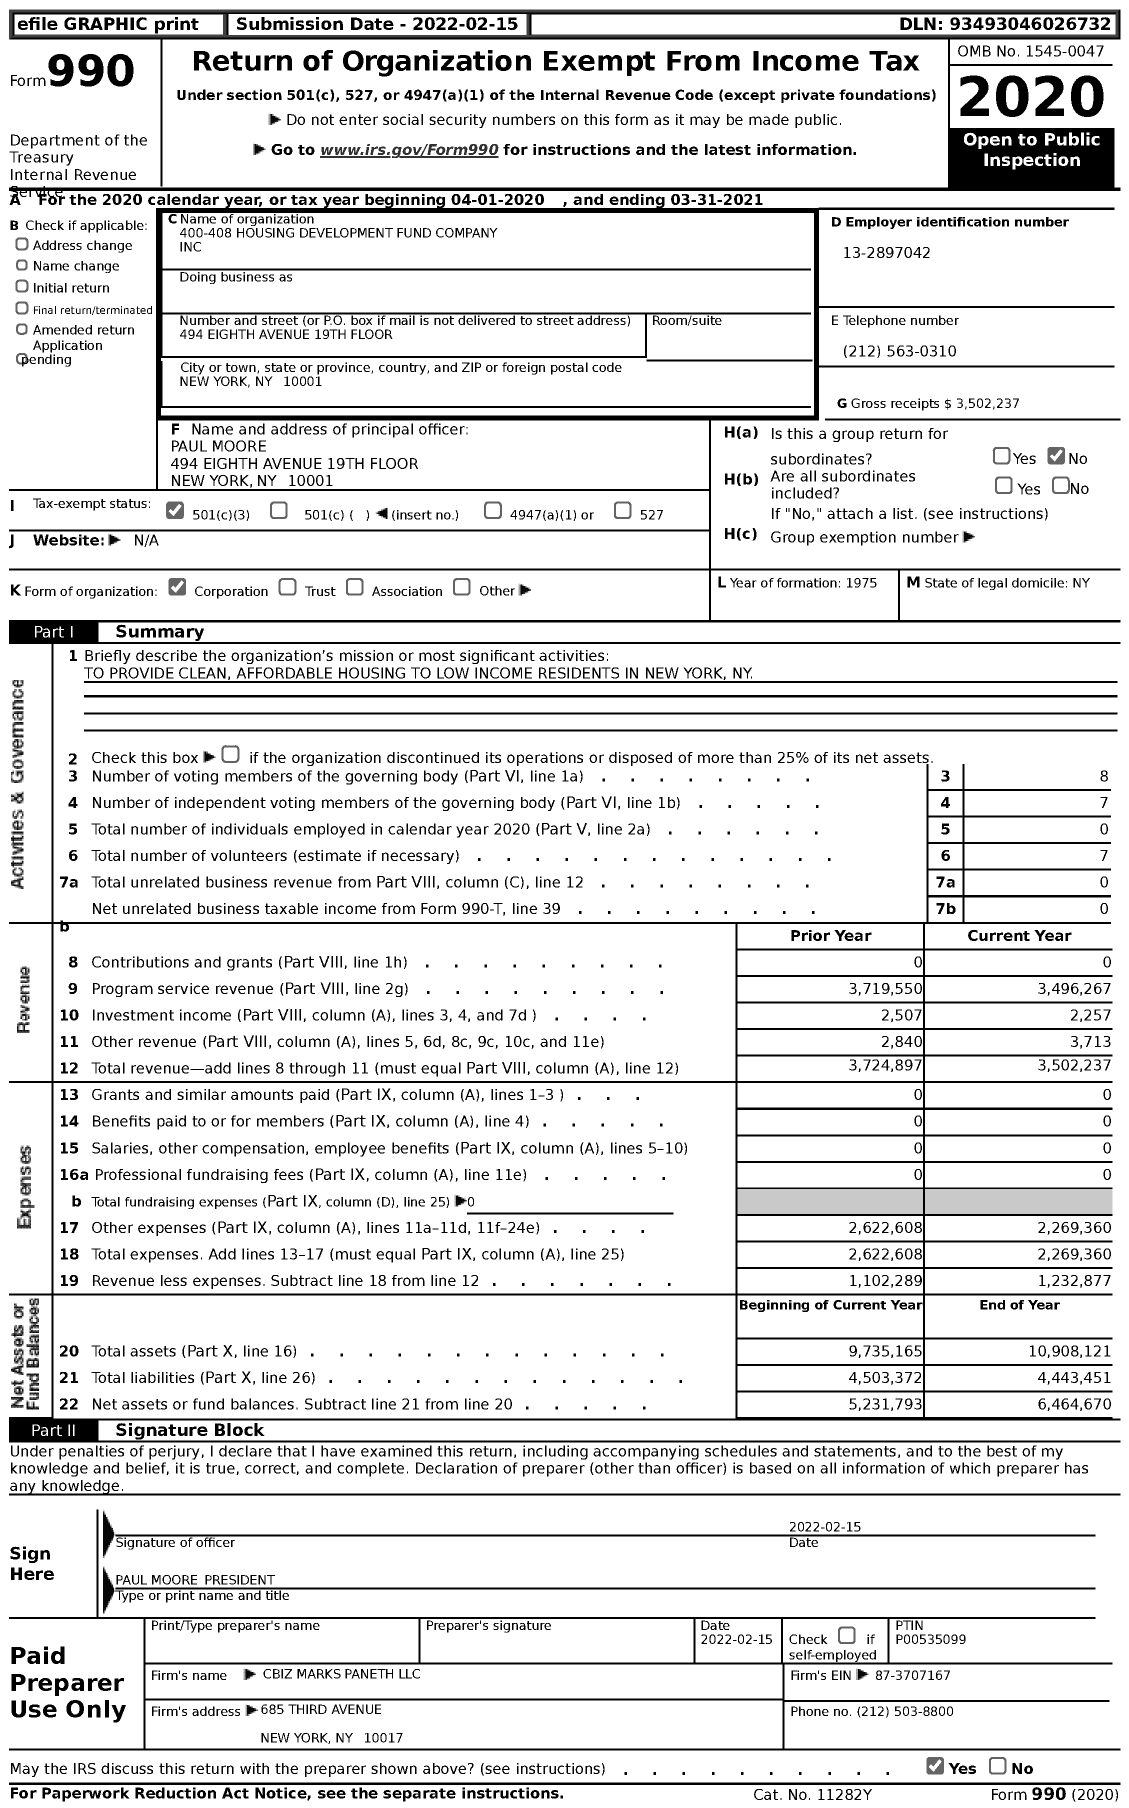 Image of first page of 2020 Form 990 for 400-408 Housing Development Fund Company